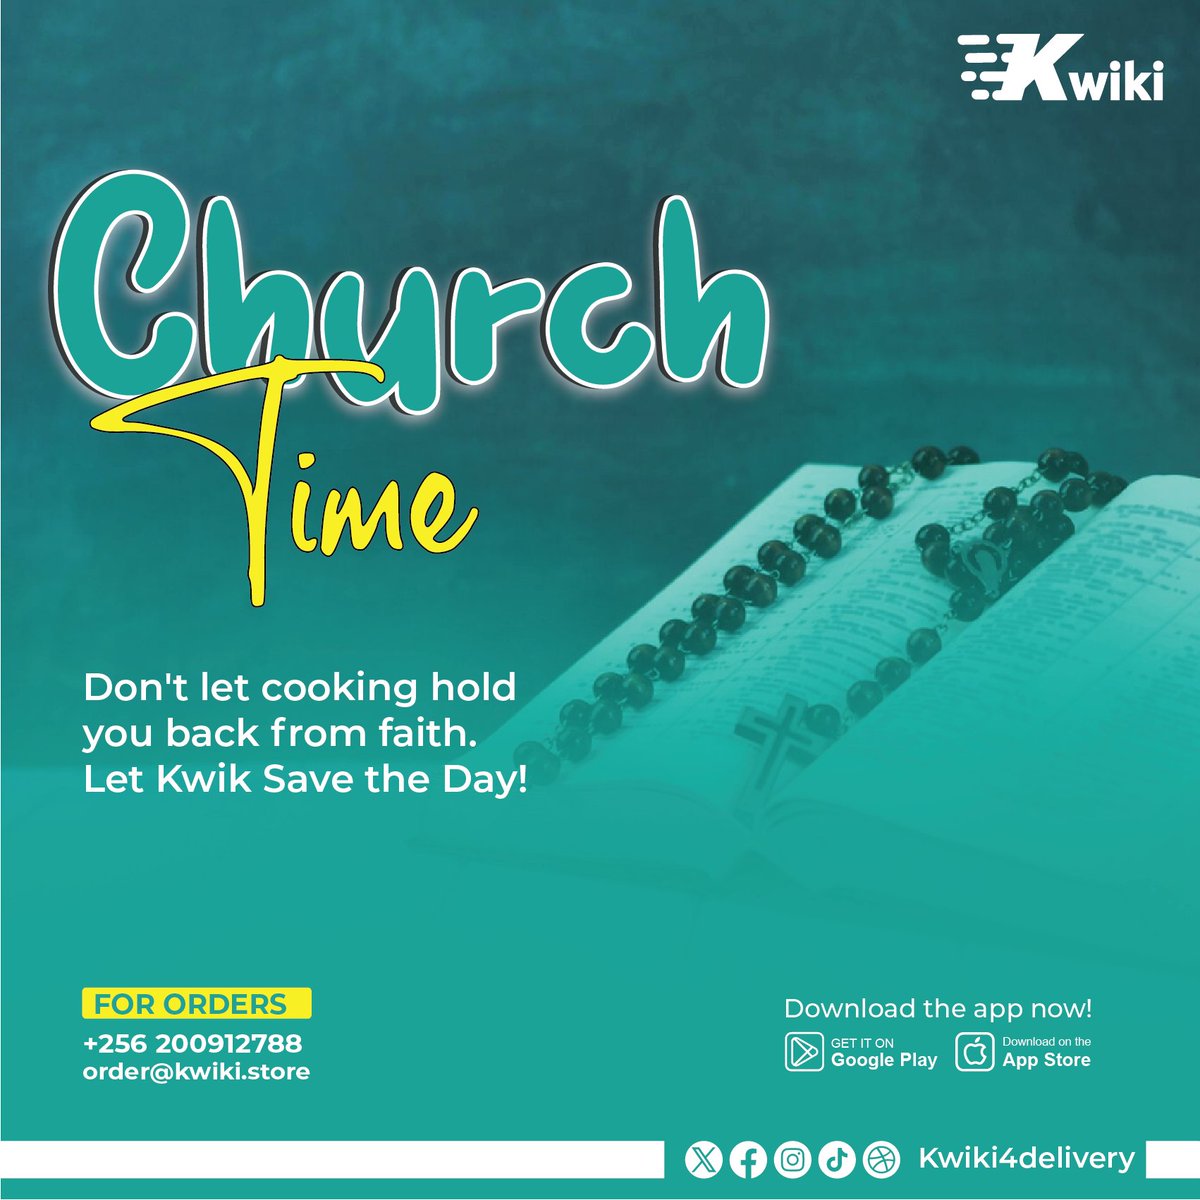 Don't let busy cooking get in the way of your religious practice. Kwiki can save the day!

#kwiki4delivery #kwikidelivery #kwiki #viral #church #happysunday #fypシ #fy #fyp #foryoupage #foryou #goviral #fastdelivery #fooddelivery #alwaysontime #doitquickwithkwiki #itsaweekend